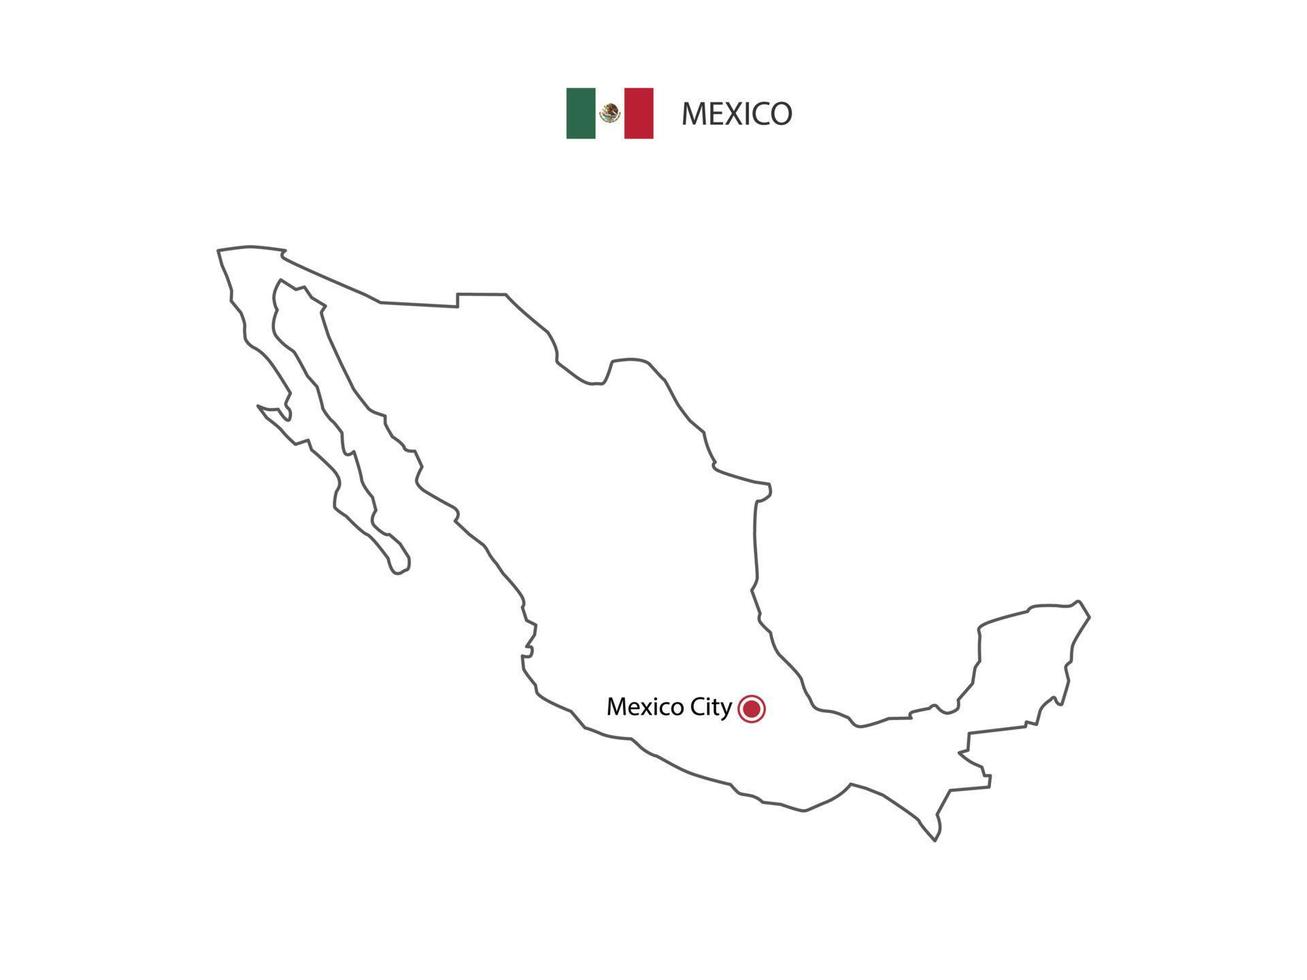 Hand draw thin black line vector of Mexico Map with capital city Mexico City on white background.